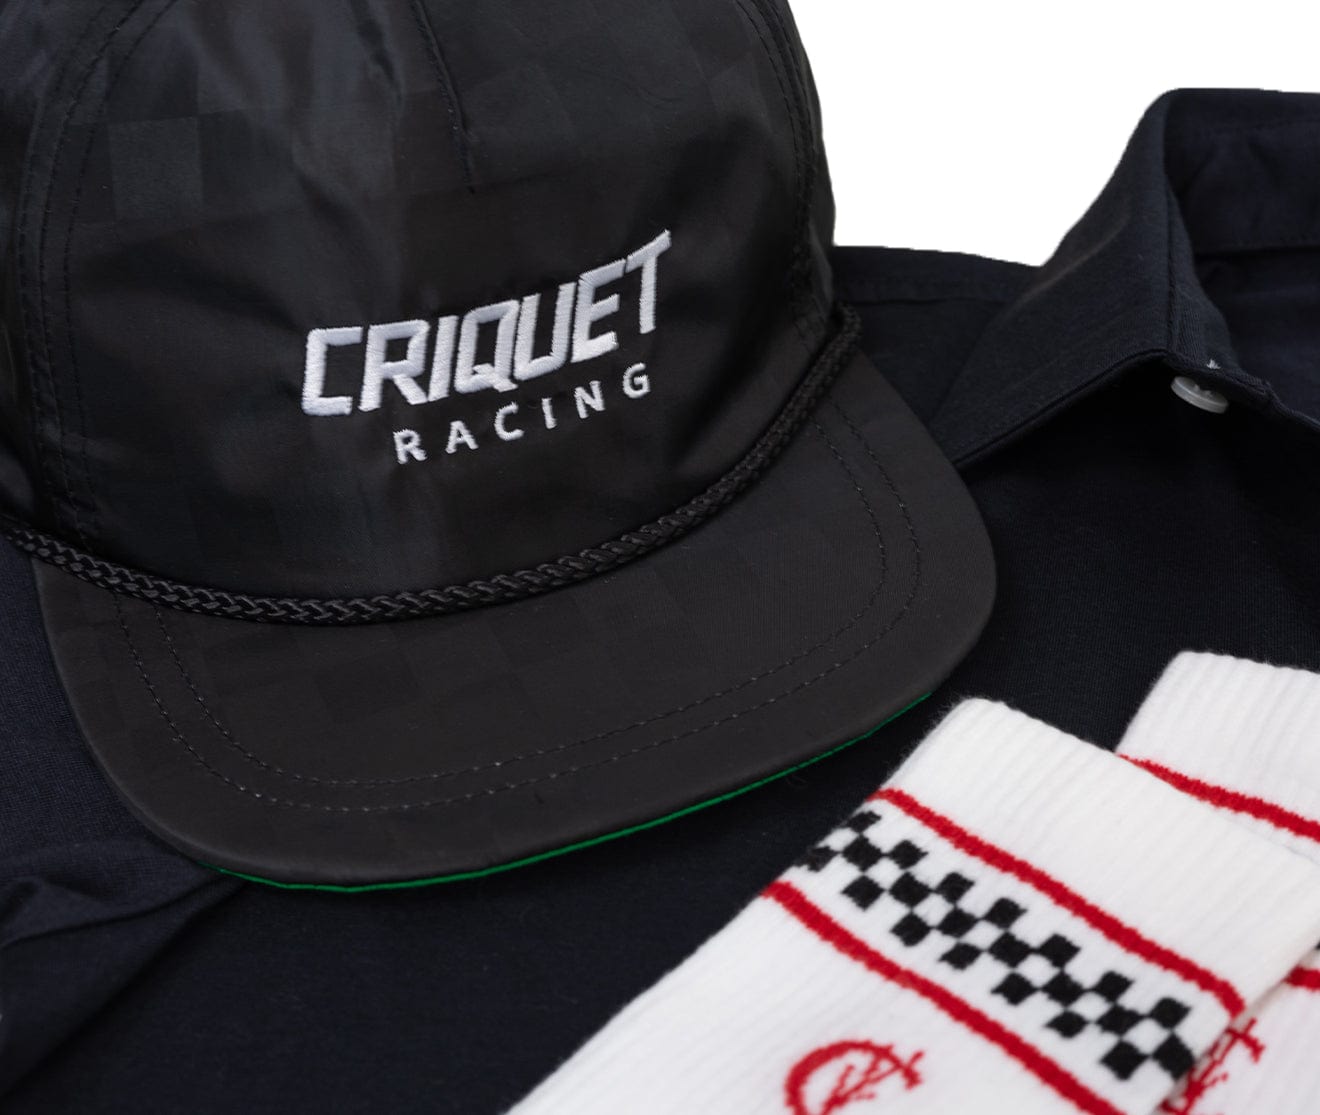 Checkered Rope Hat - Criquet Racing - Black